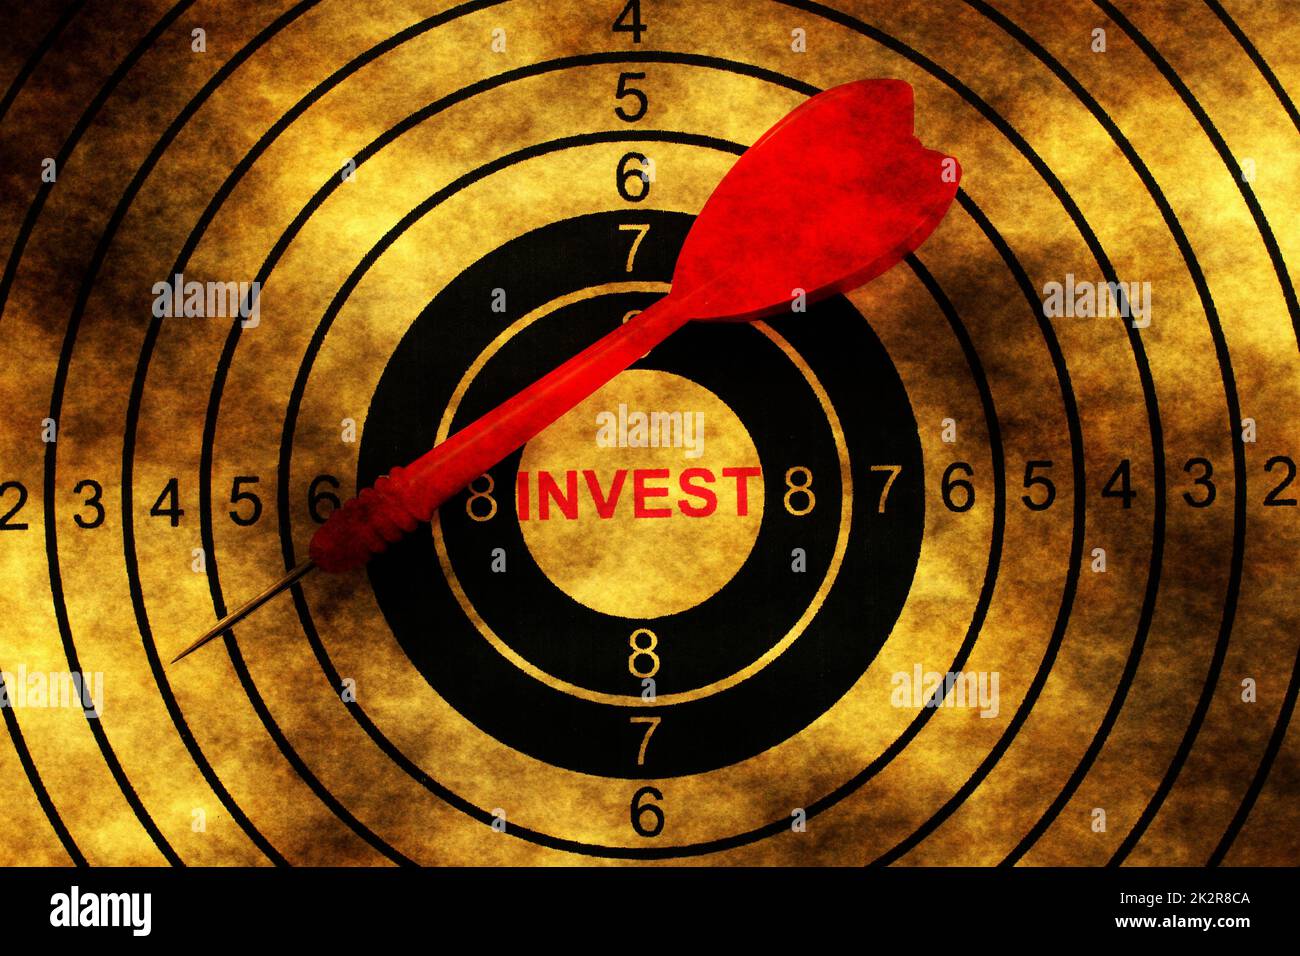 Invest target on grunge background Stock Photo